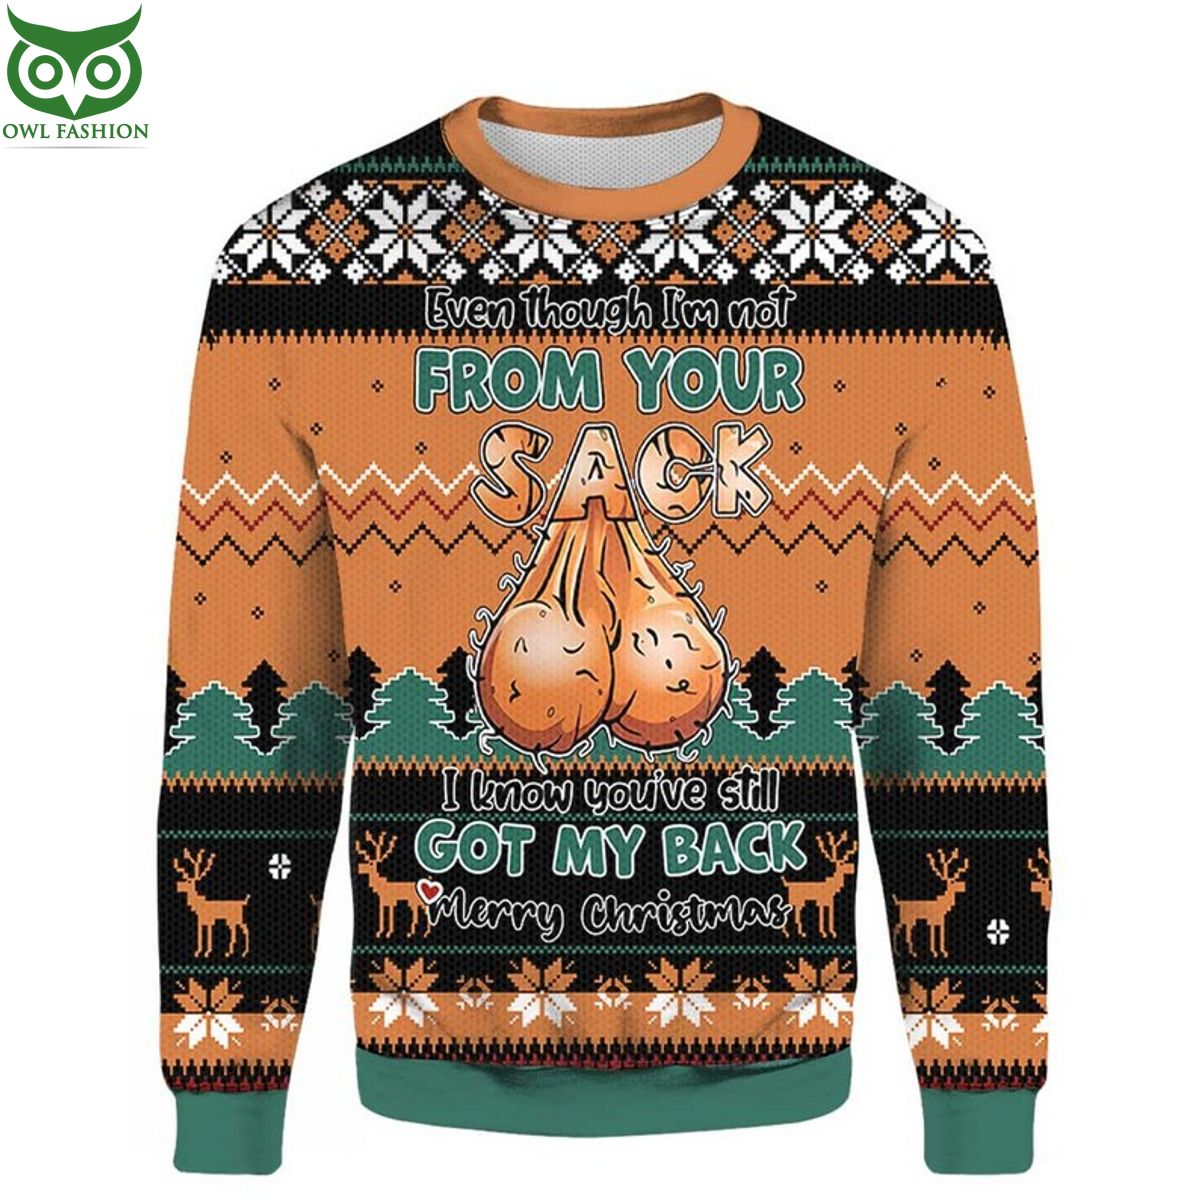 special edition merry christmas 3d ugly sweater jumper 1 Qrnzq.jpg